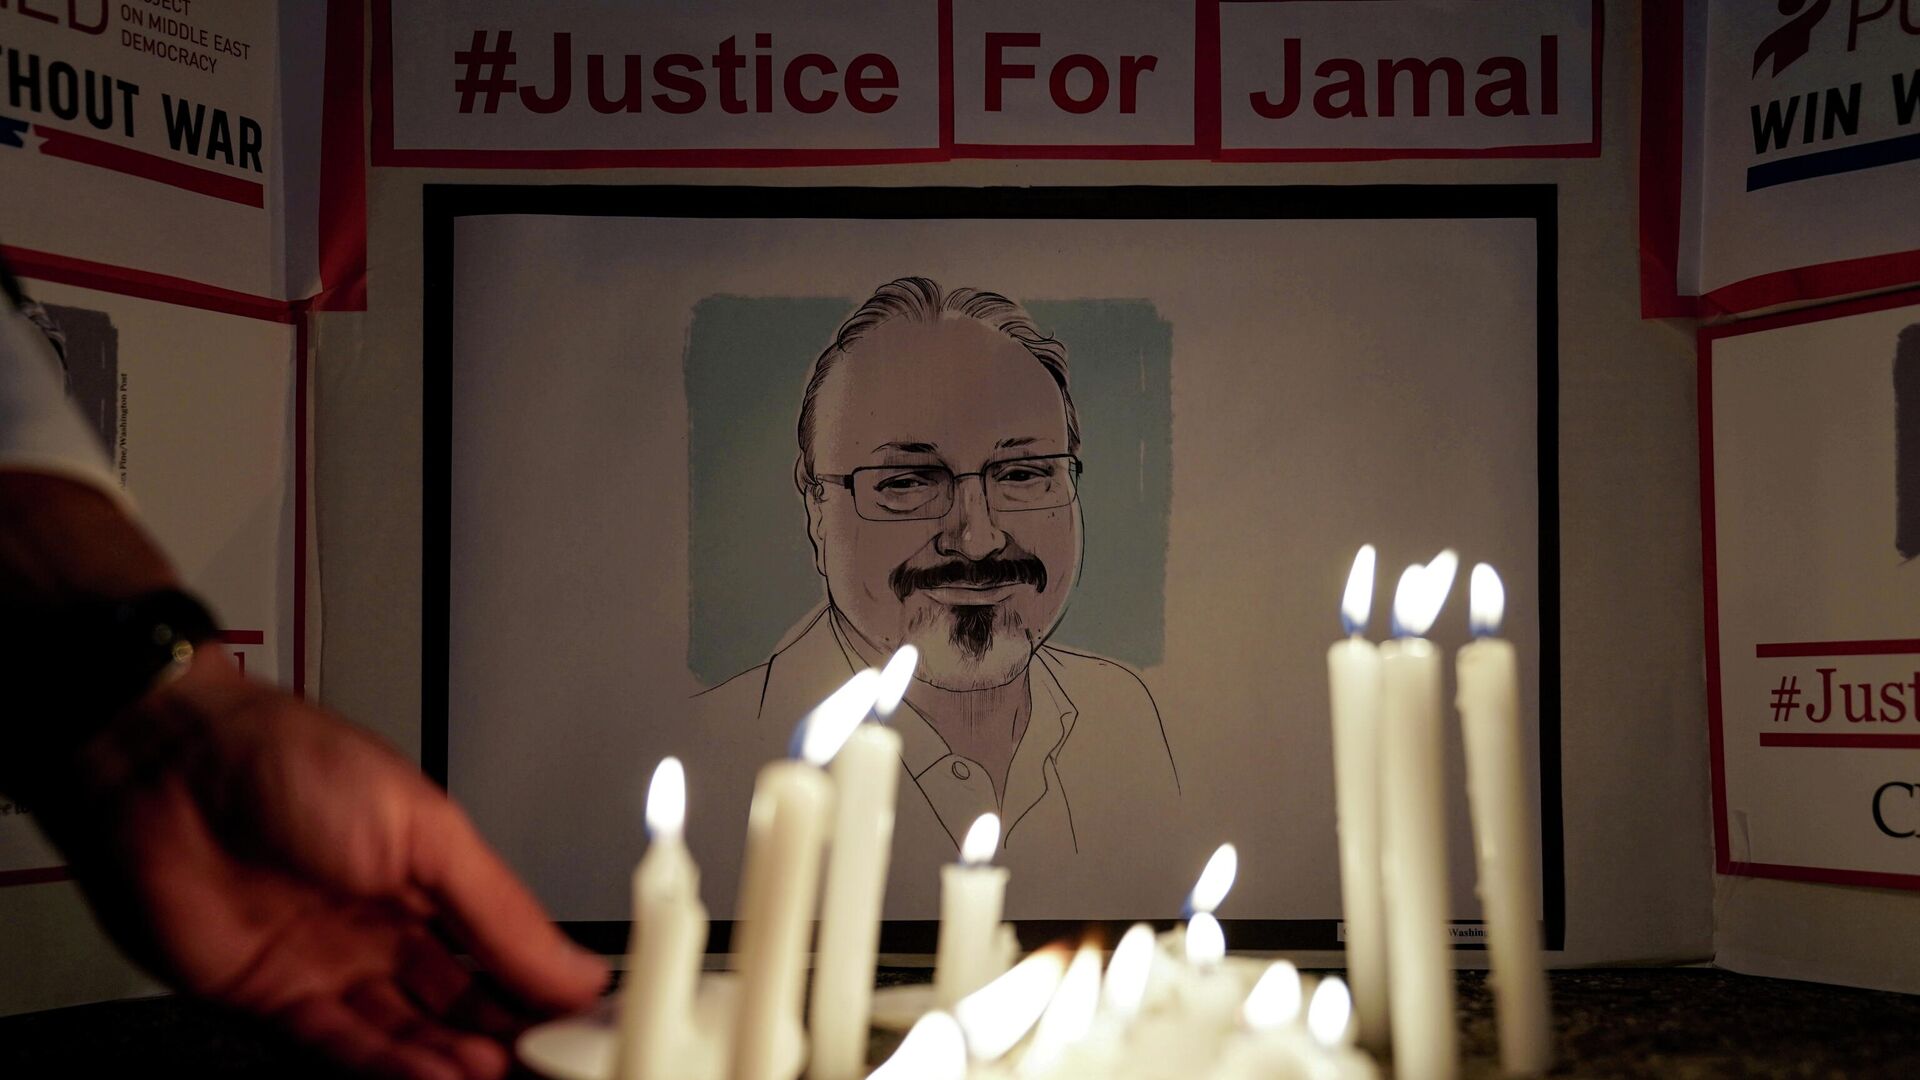 FILE PHOTO: The Committee to Protect Journalists and other press freedom activists hold a candlelight vigil in front of the Saudi Embassy to mark the anniversary of the killing of journalist Jamal Khashoggi at the kingdom's consulate in Istanbul, in Washington, U.S., October 2, 2019 - Sputnik International, 1920, 08.12.2021